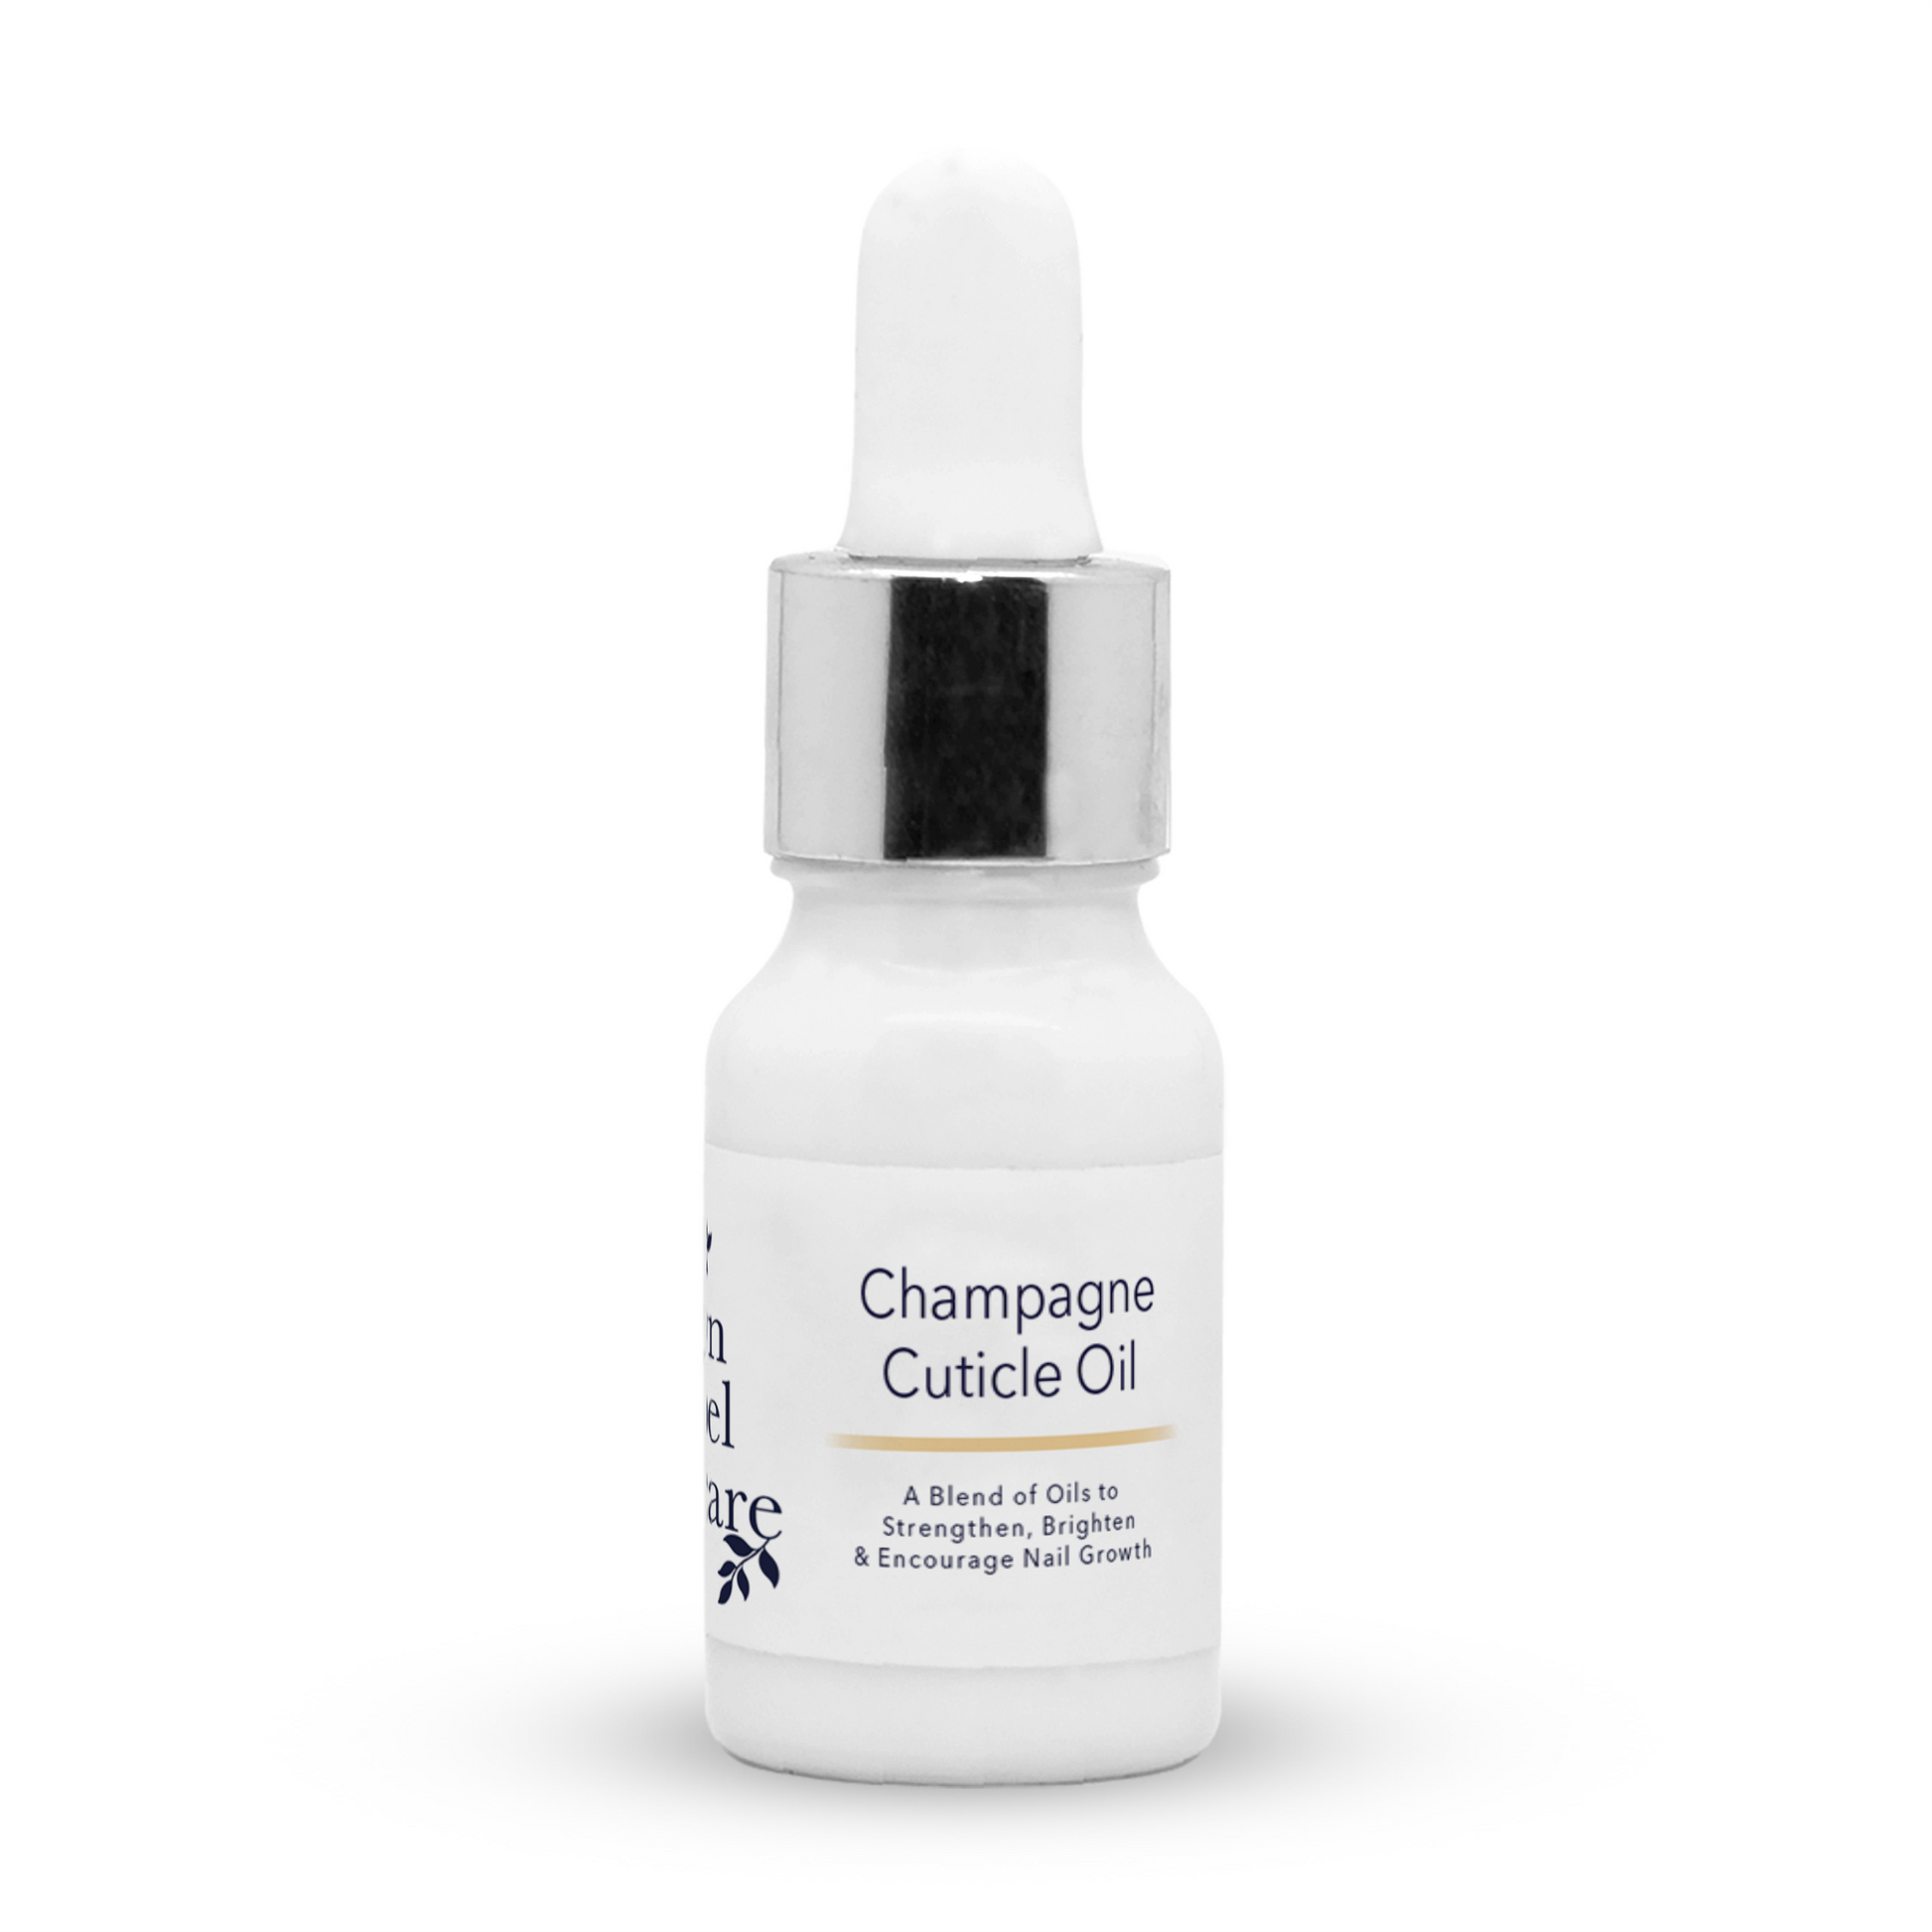 CHAMPAGNE CUTICLE OIL | OWN LABEL